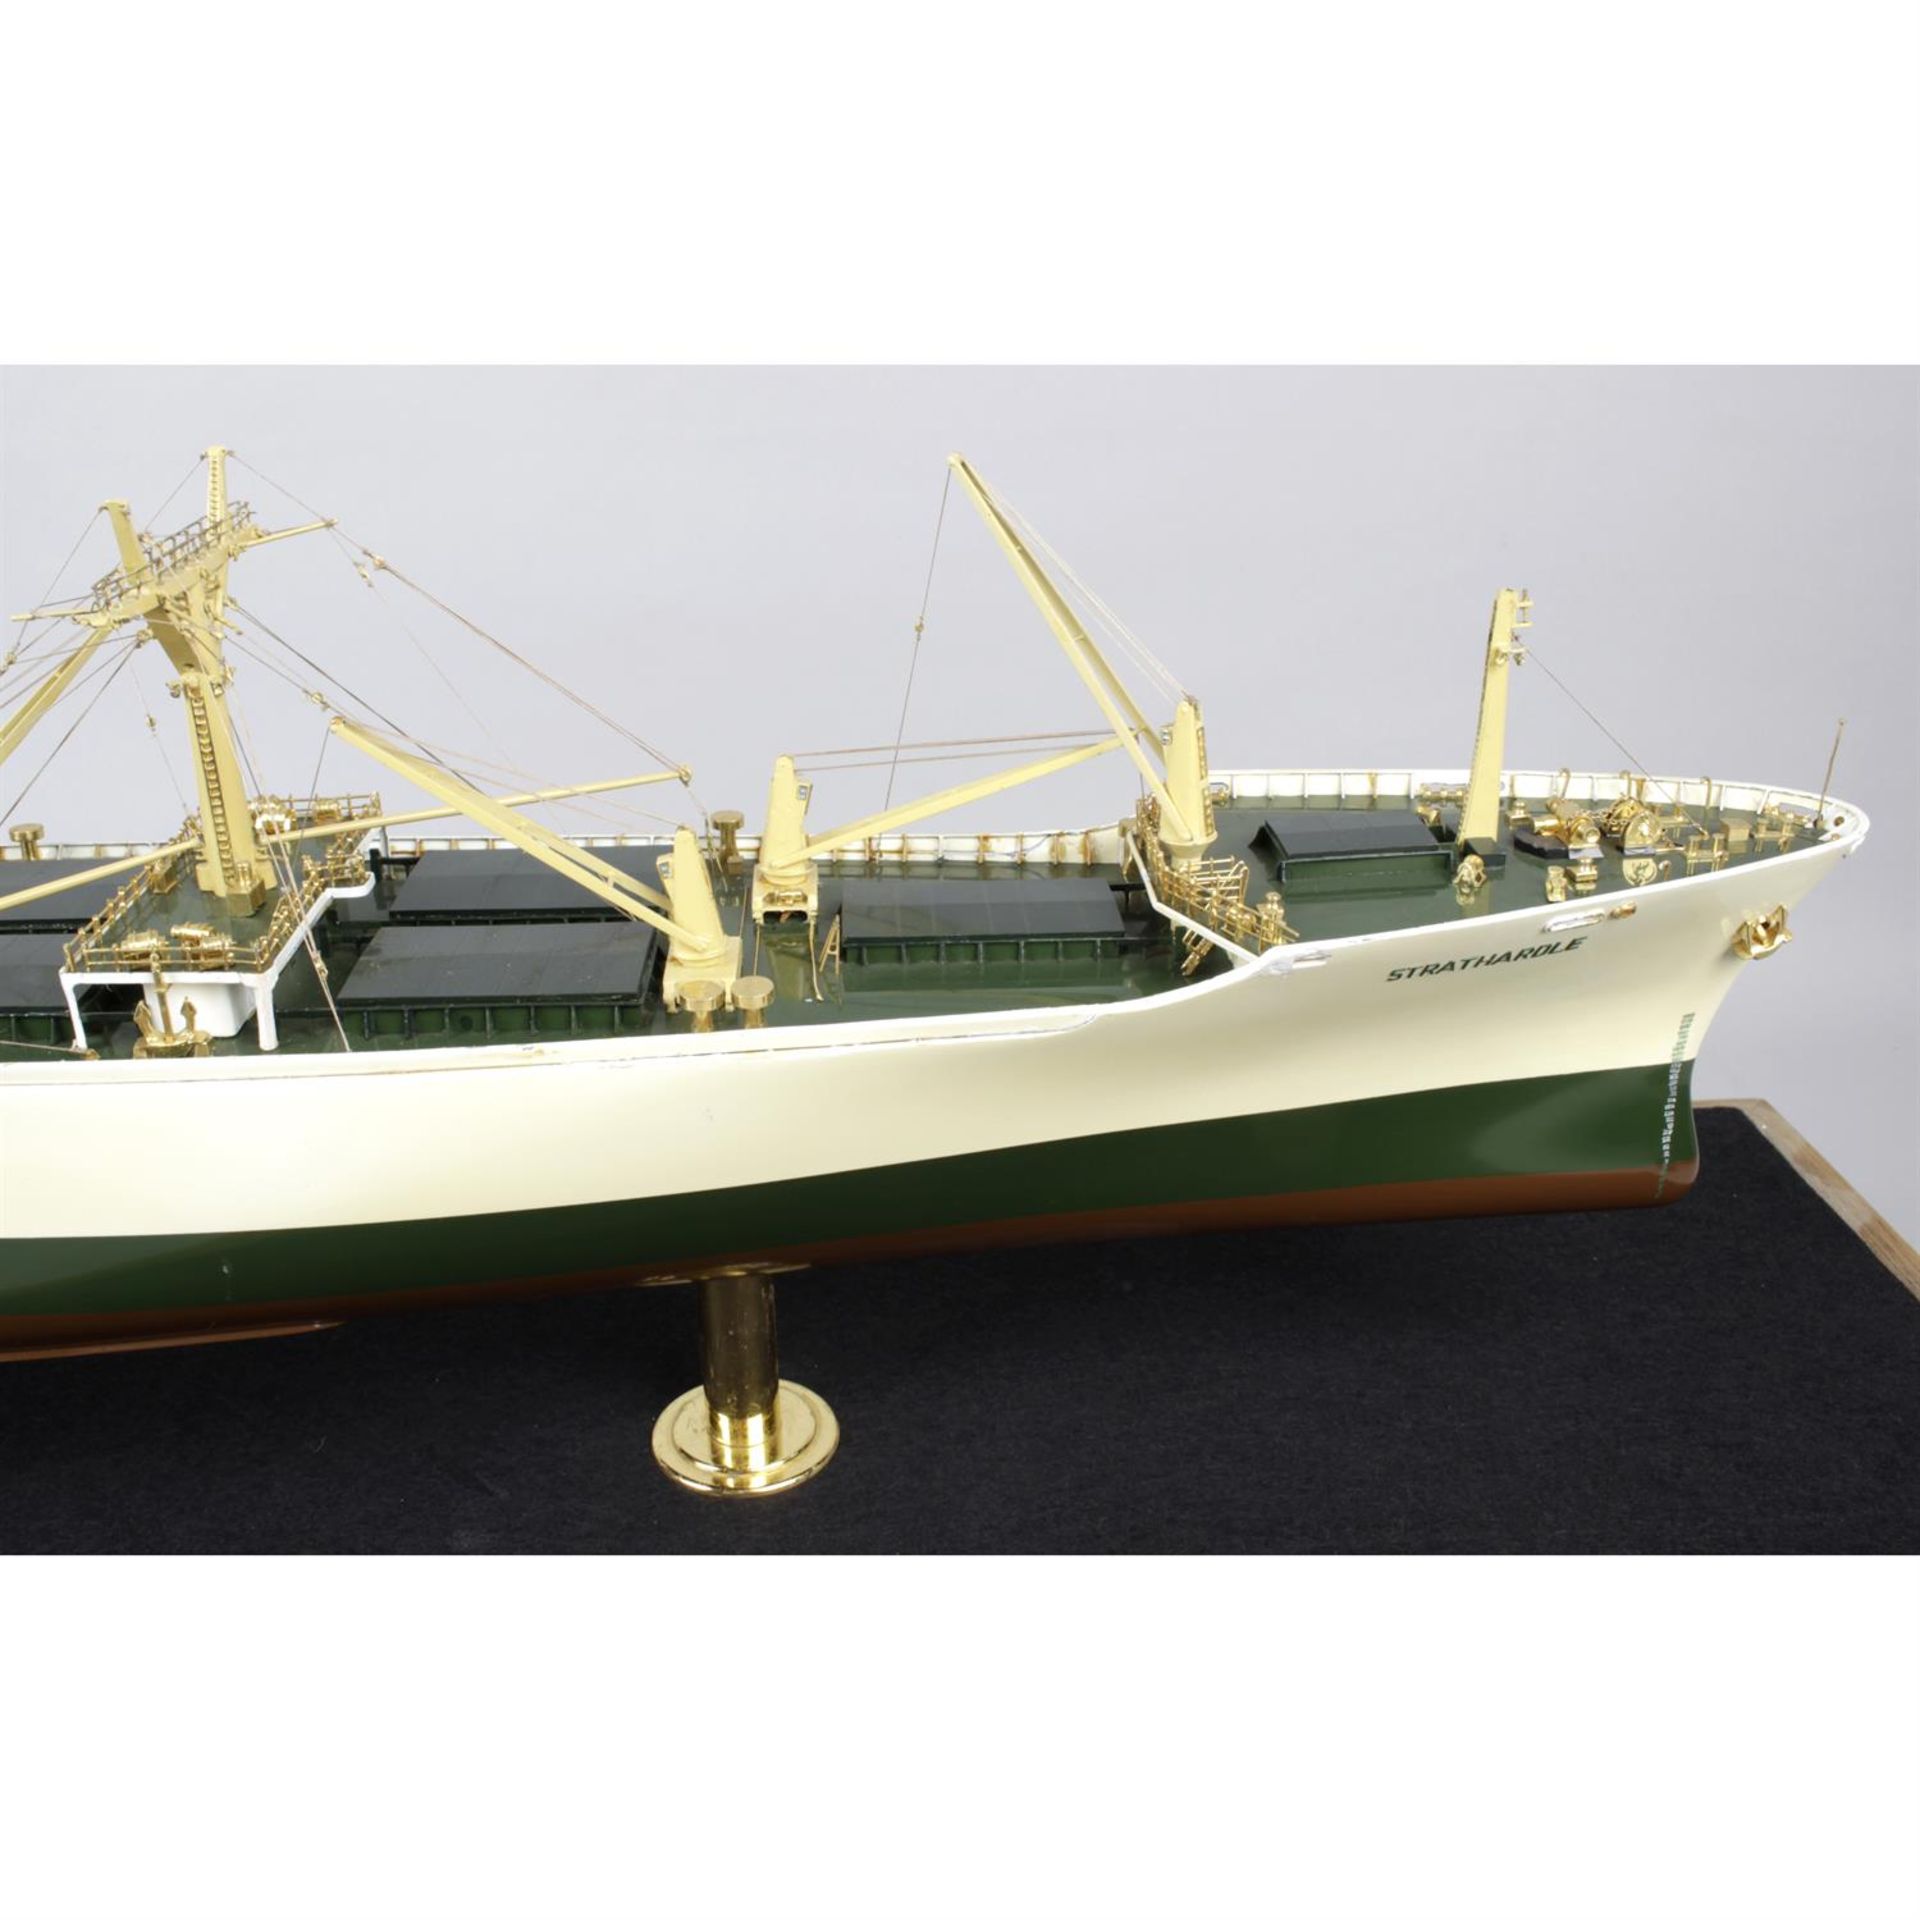 A fine boardroom or ship builders model of the Super High Speed Cargo Liner “Strathardle” of The - Image 4 of 5